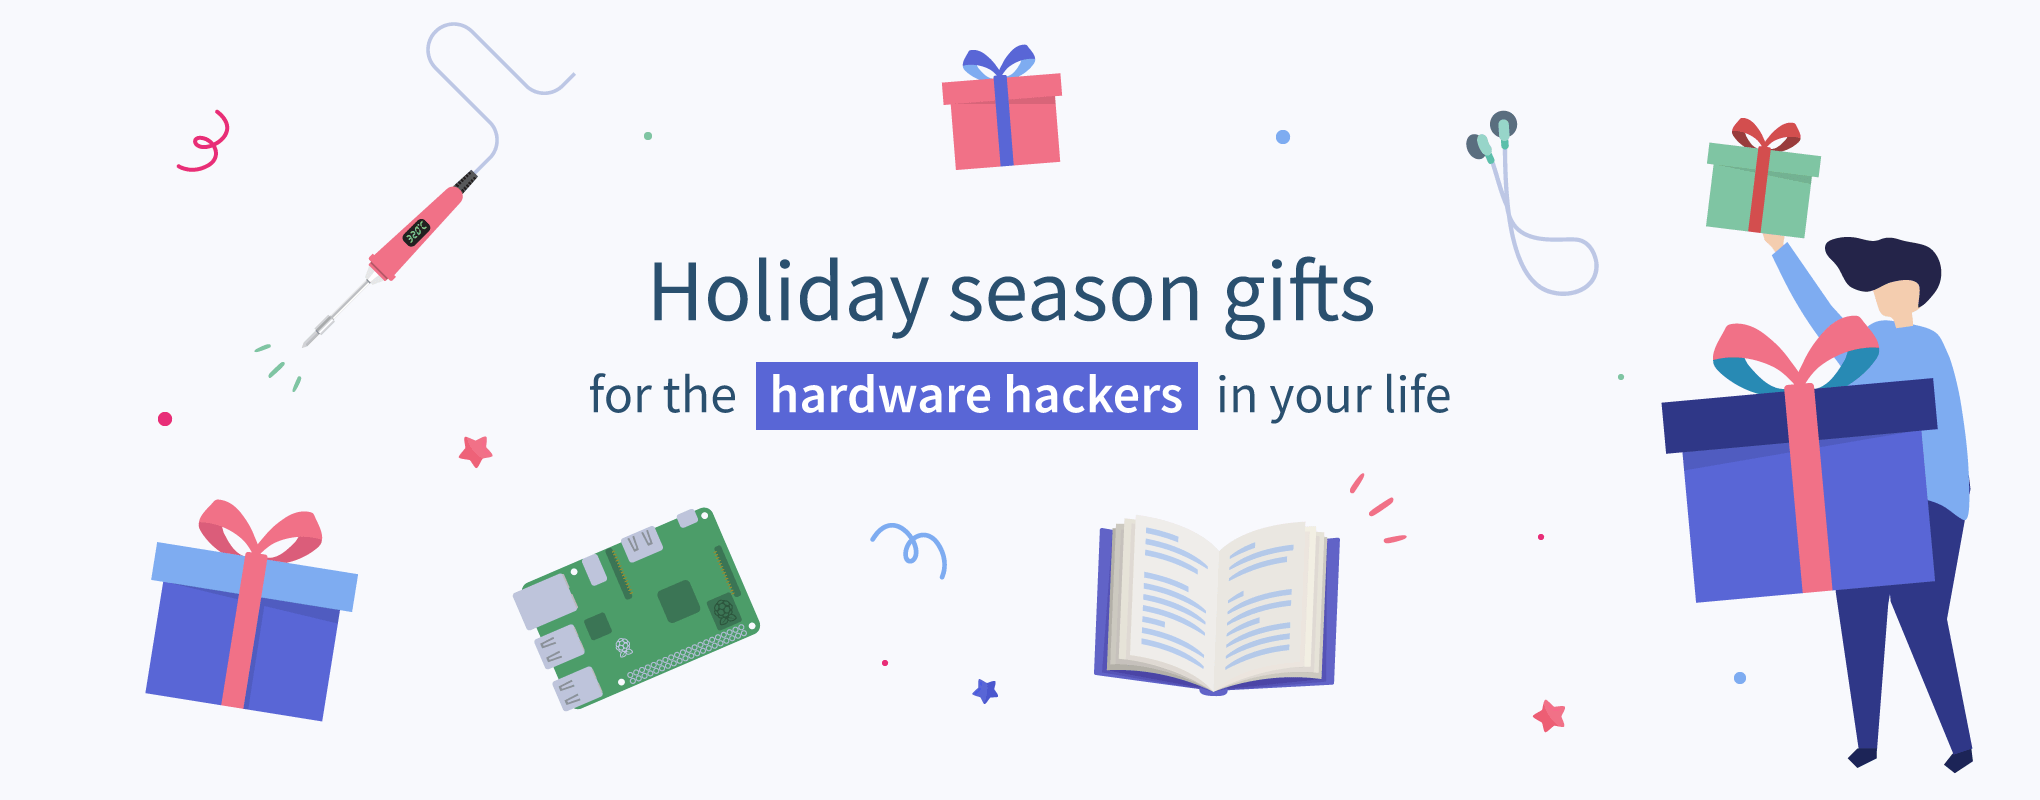 Holiday gift suggestions for the hardware hackers in your life